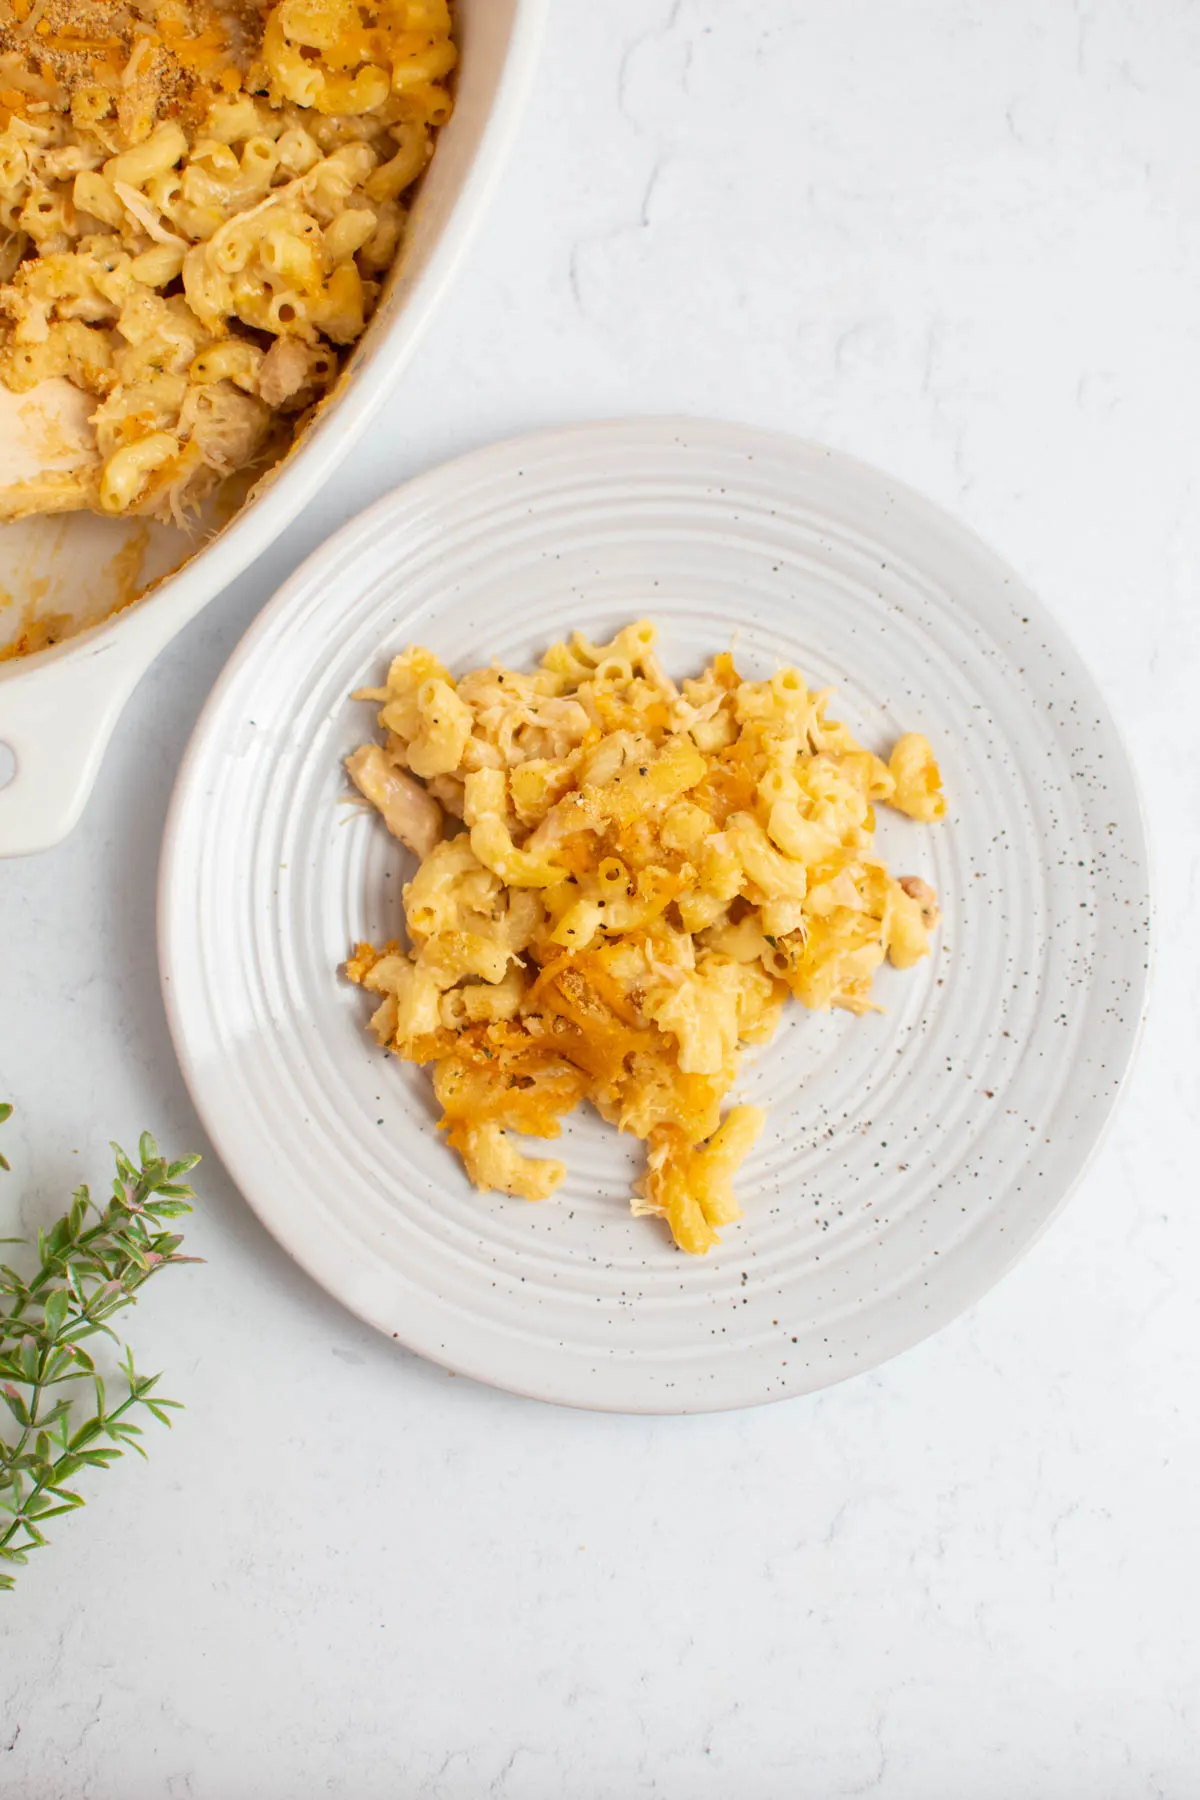 Serving of chicken mac and cheese casserole on white plate with greenery nearby.